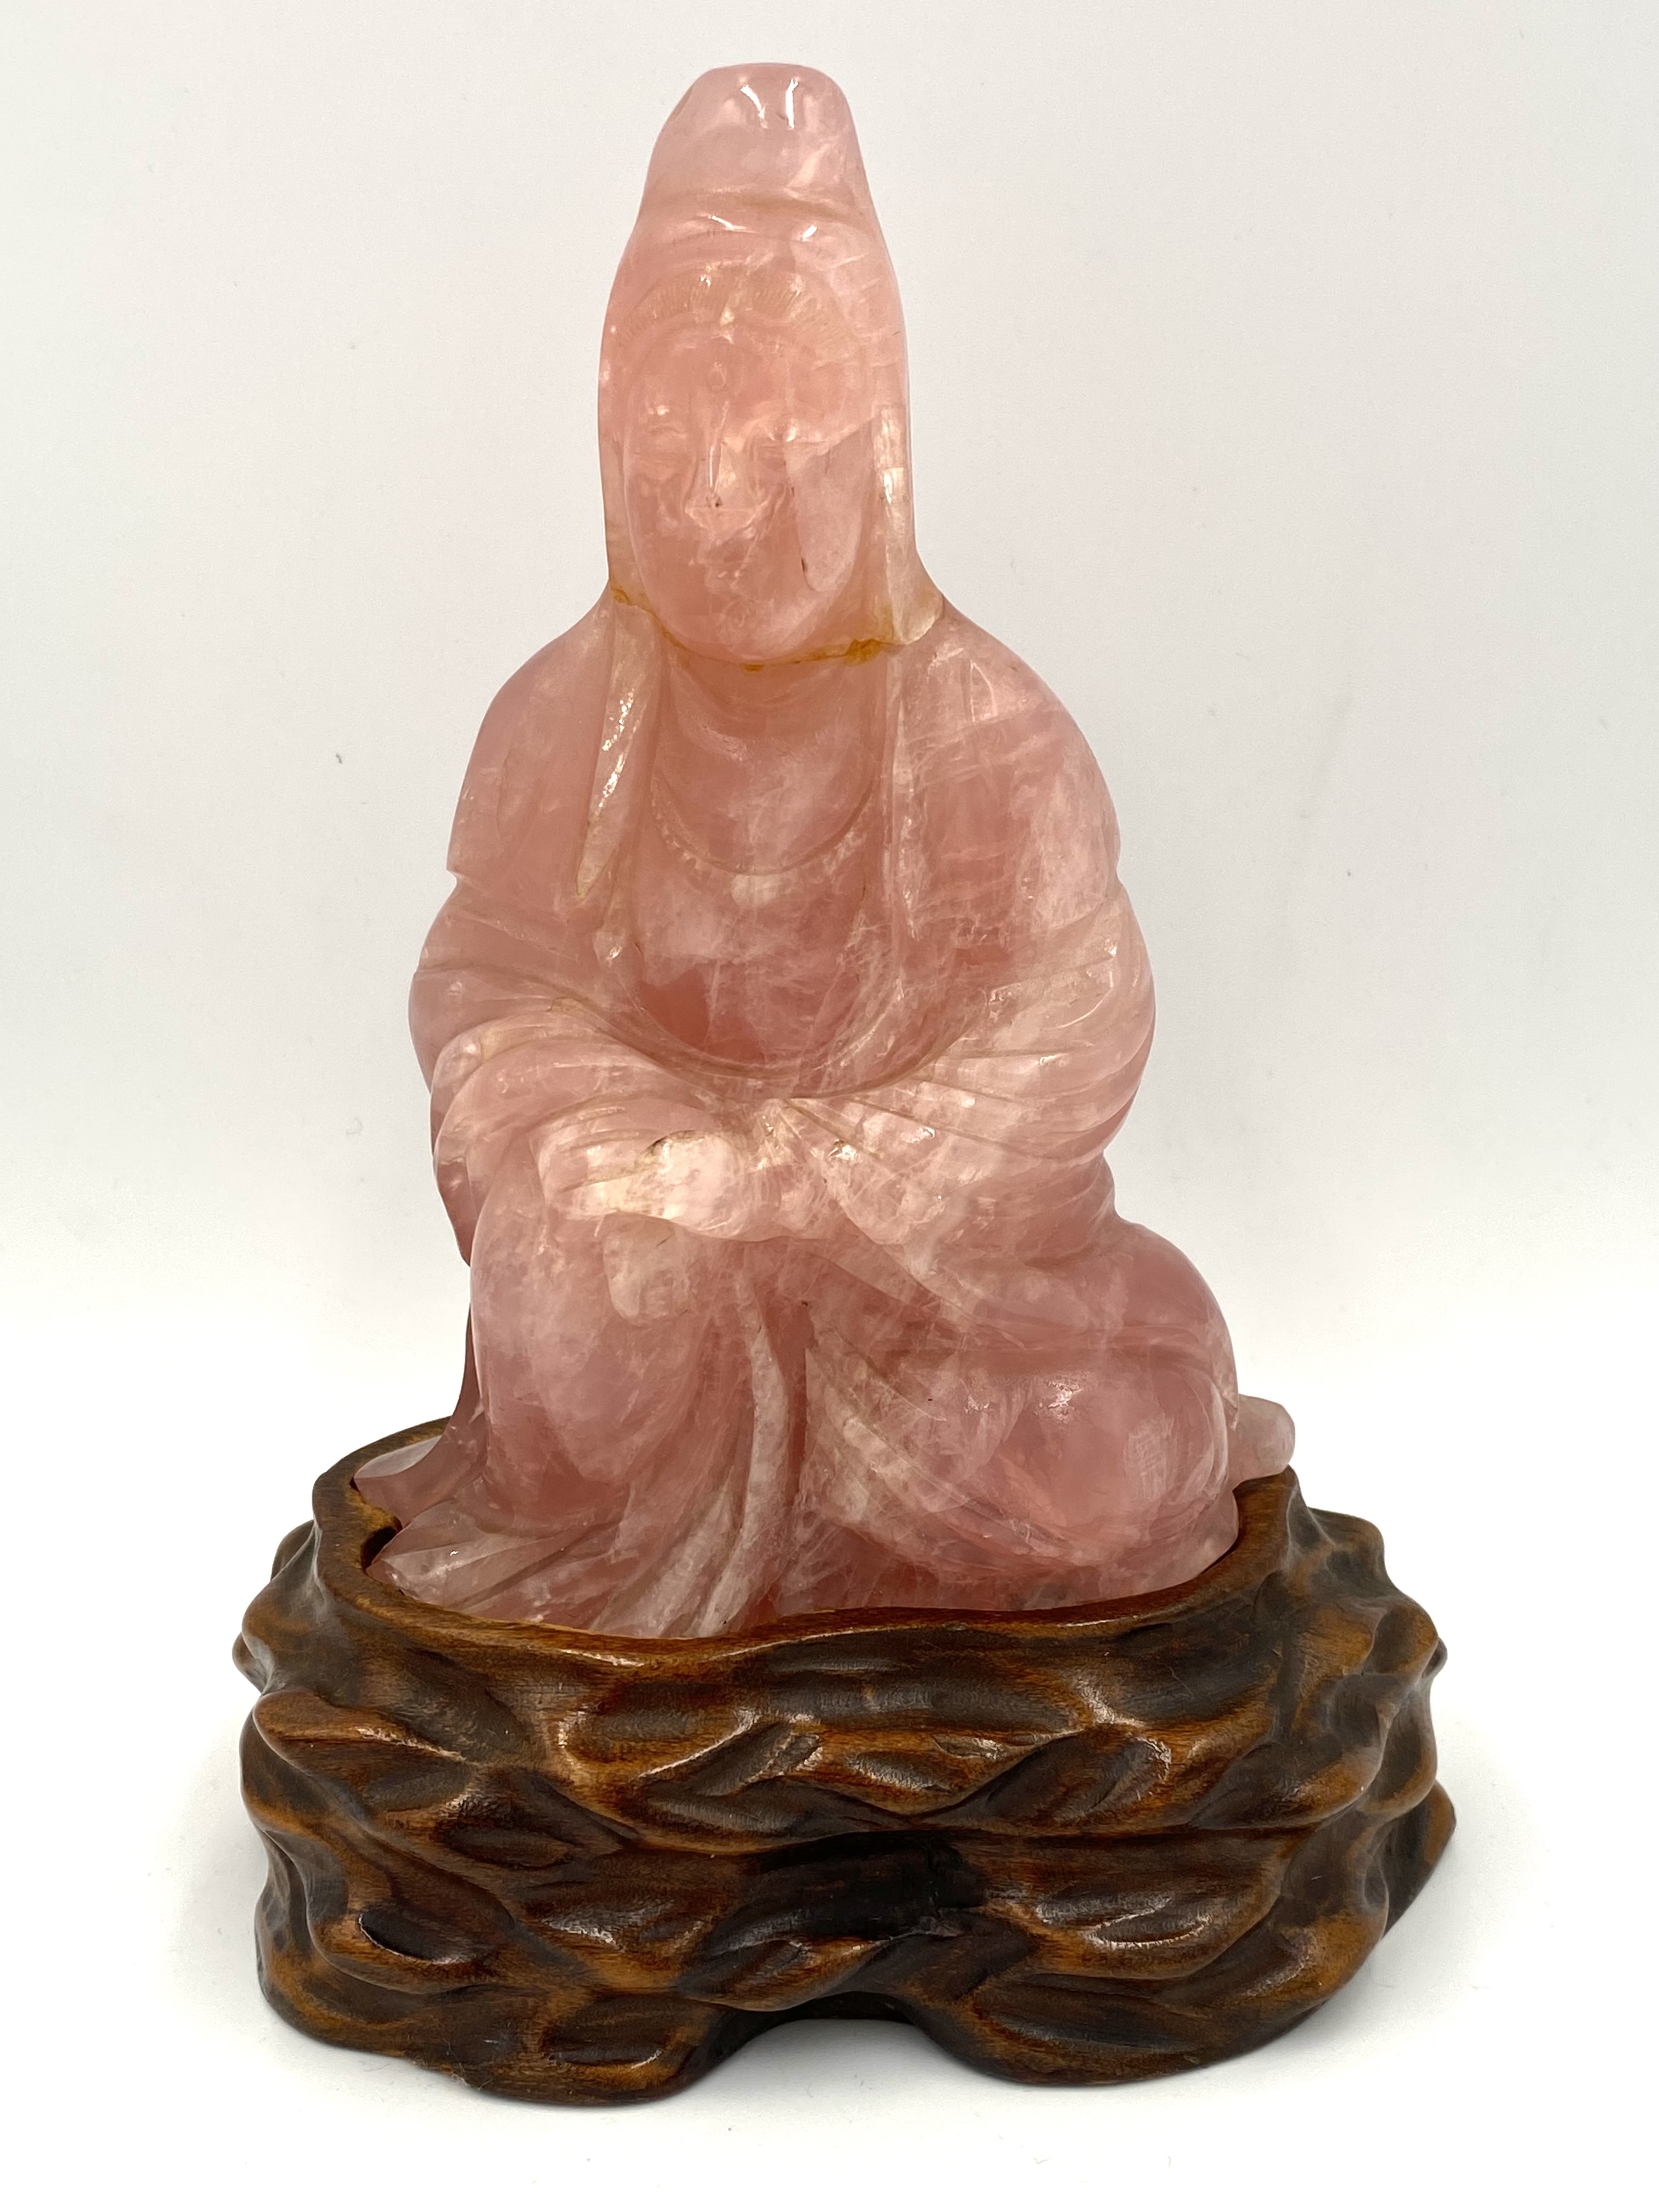 Early 20th century Chinese rose quartz figure of Guanyin